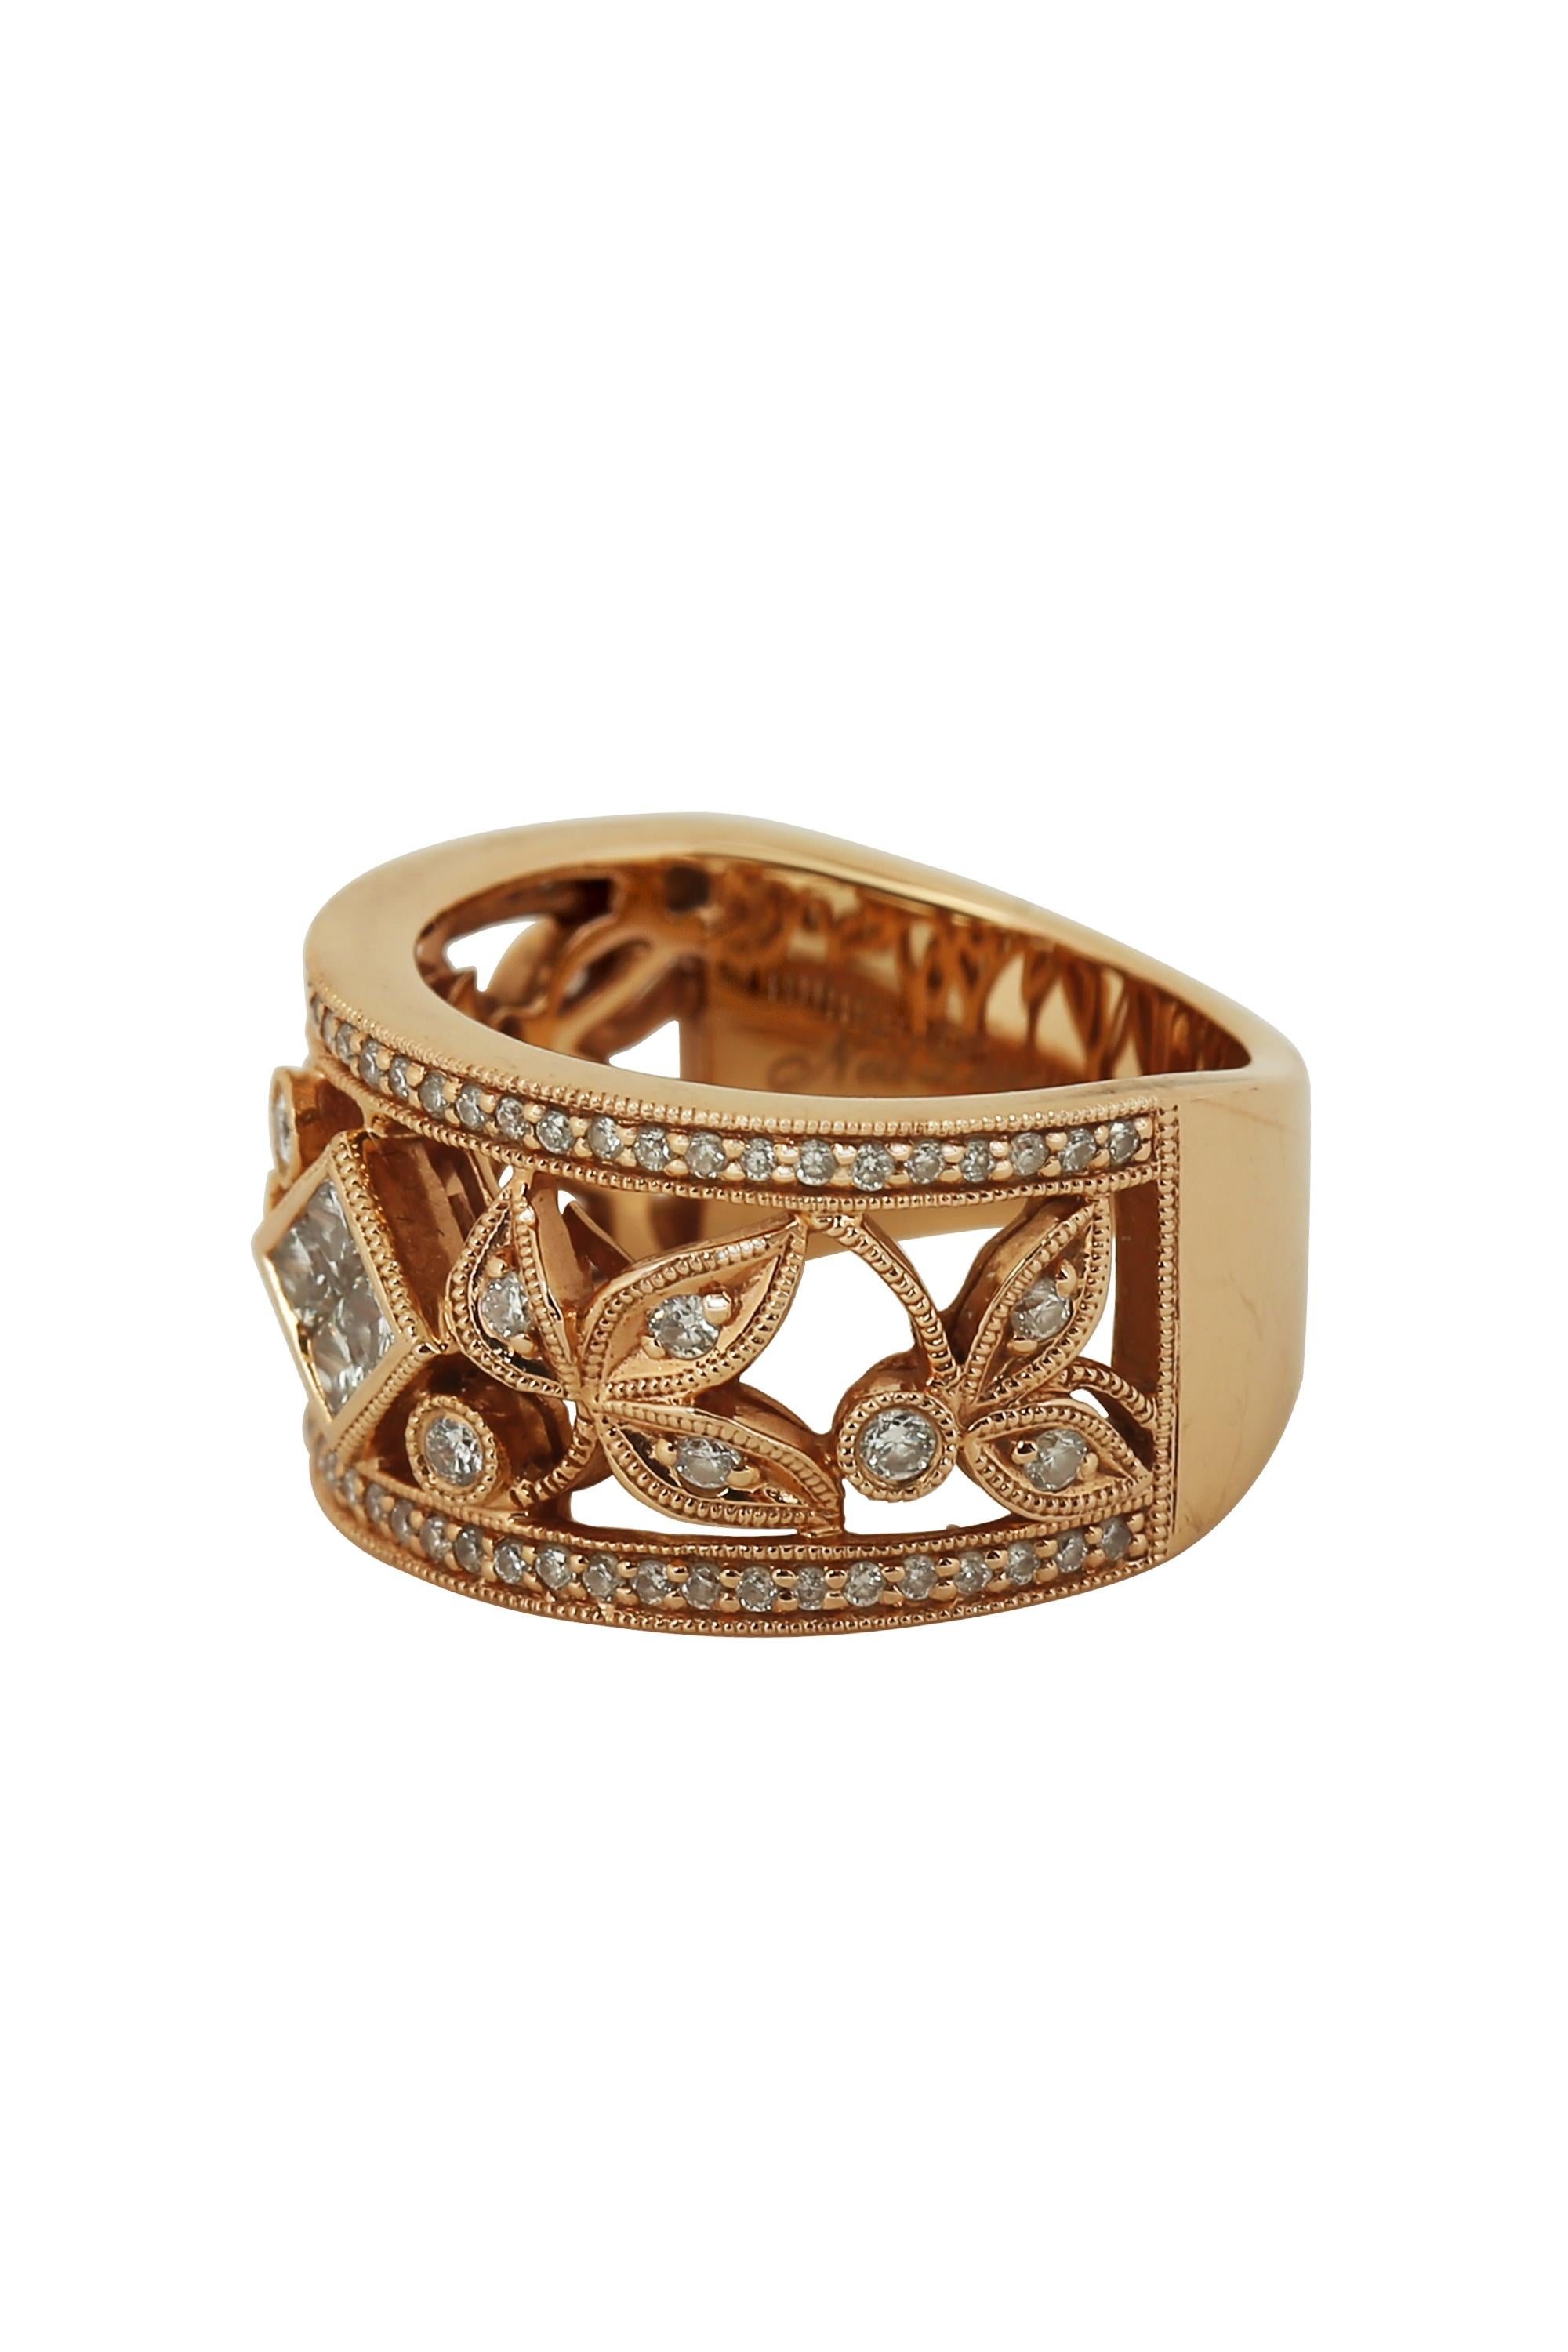 A 14 karat pink gold and diamond floral band ring by Neil Lane. This beautifully crafted ring features a graceful openwork design, beaded gold detailing and a center diamond shape cluster of princess cut diamonds. Total diamond weight is